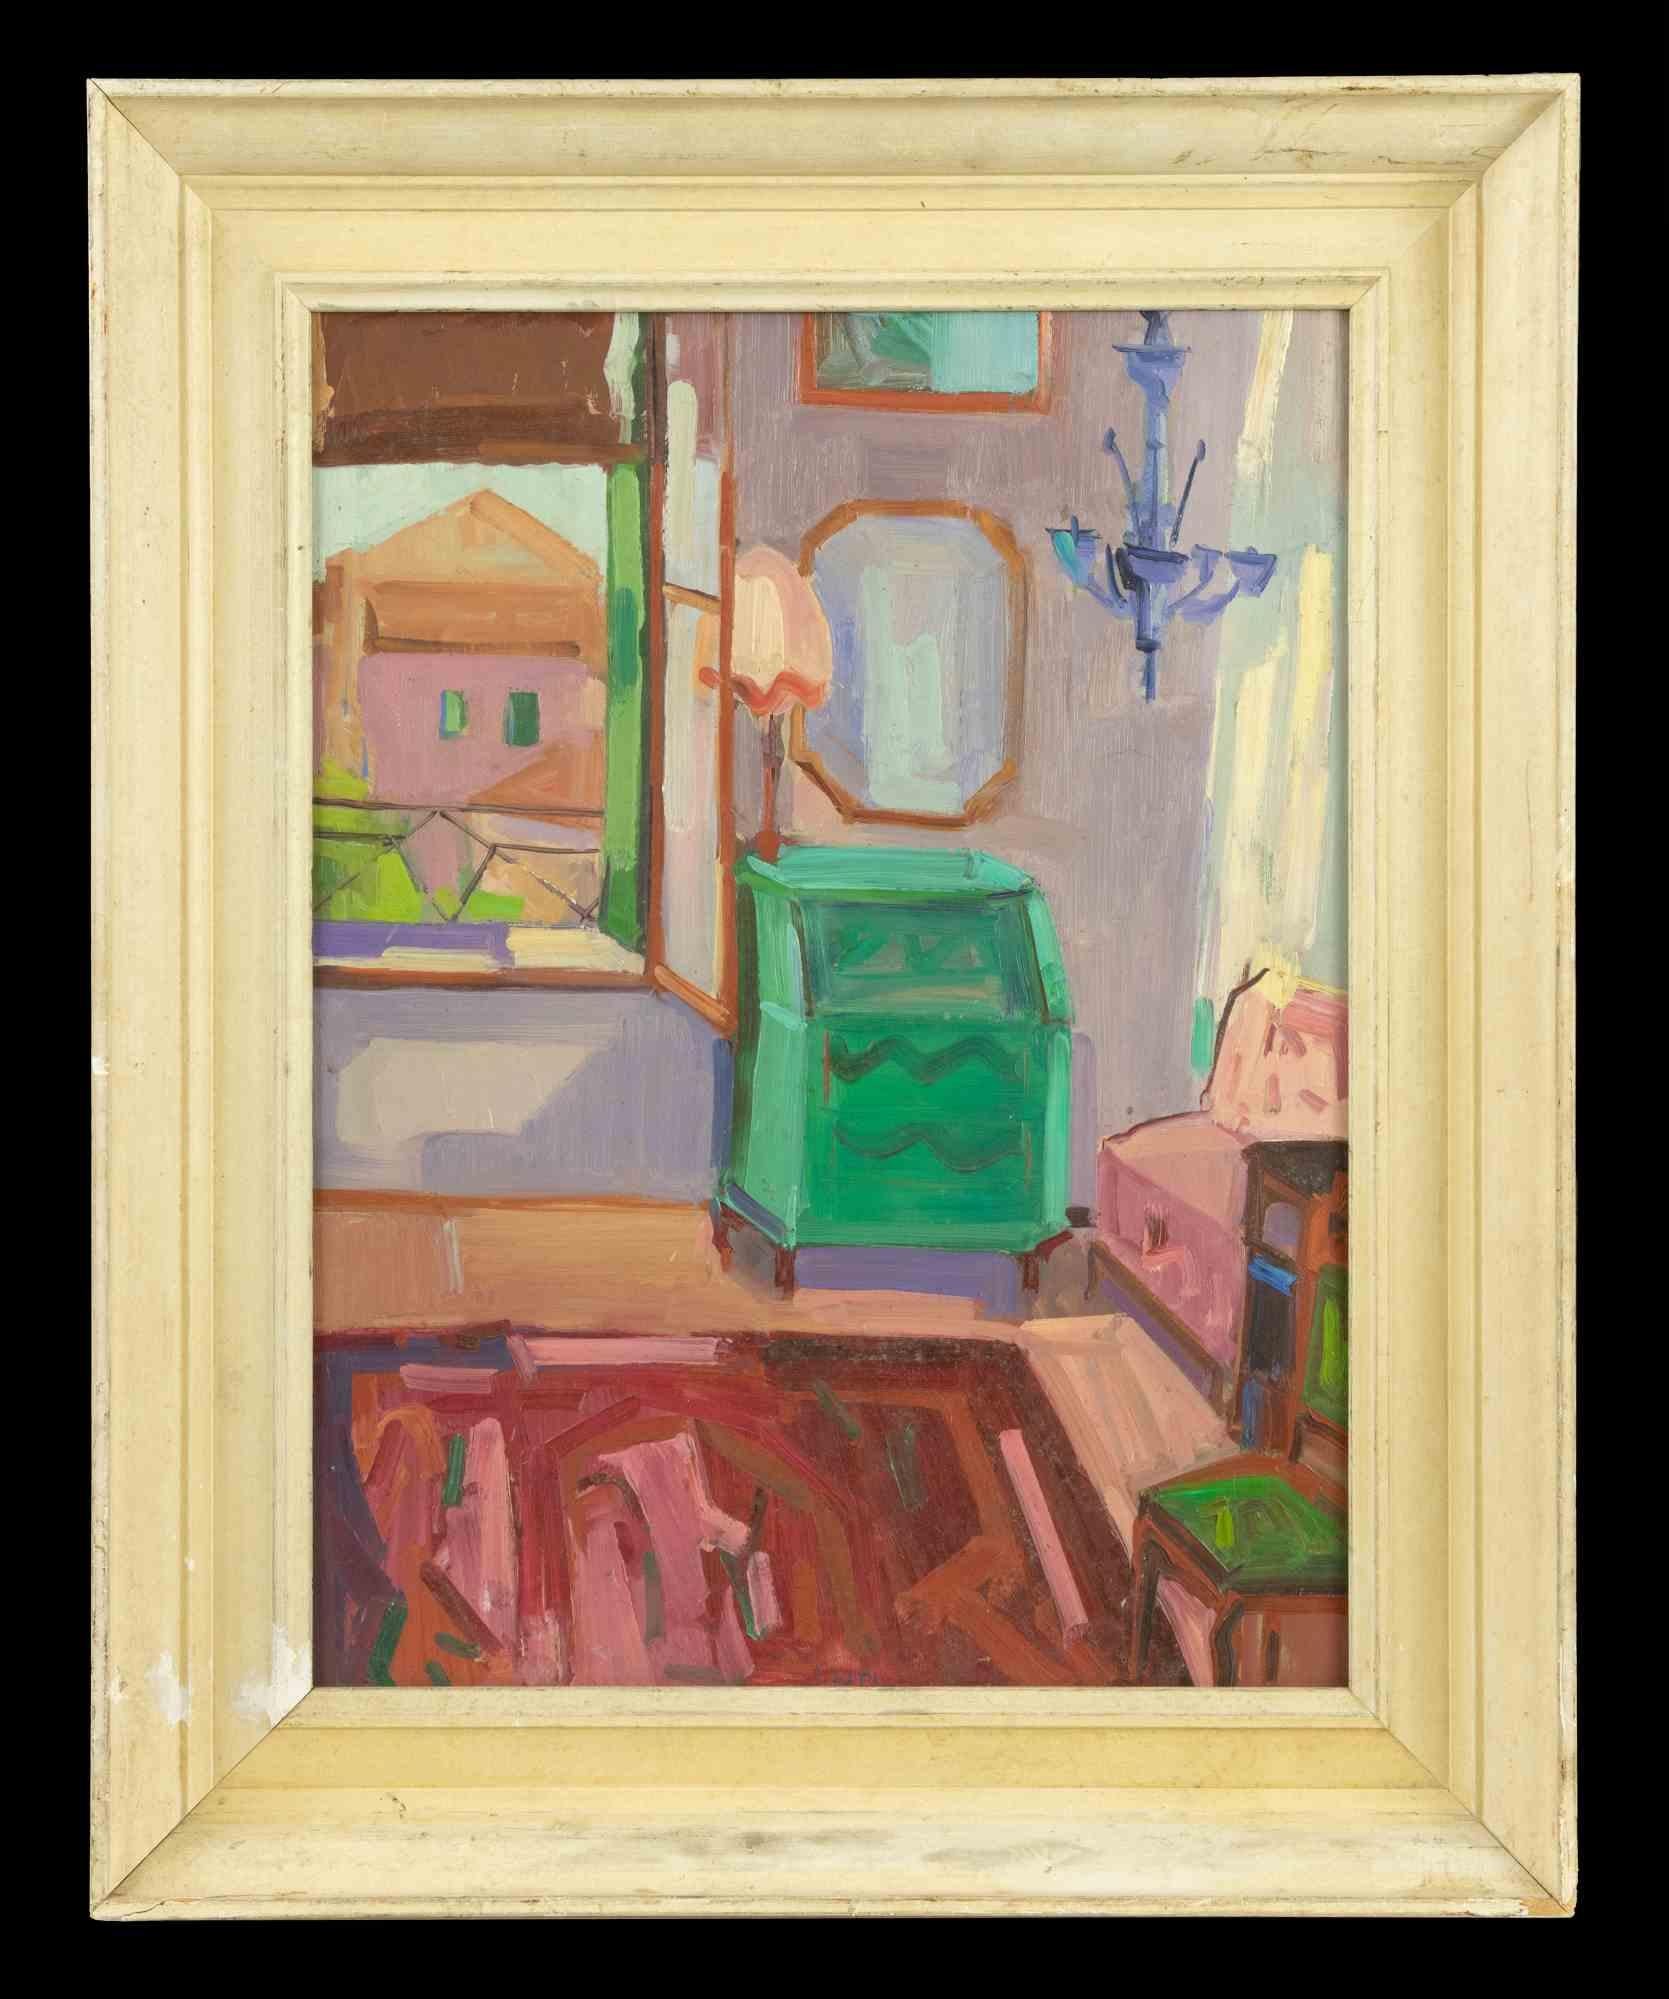 Bedroom is an original modern artwork realized by Artist of mid-20th century and attributed to Jane Levy.

Mixed colored oil on board.

Includes frame: 53.5 x 44 cm